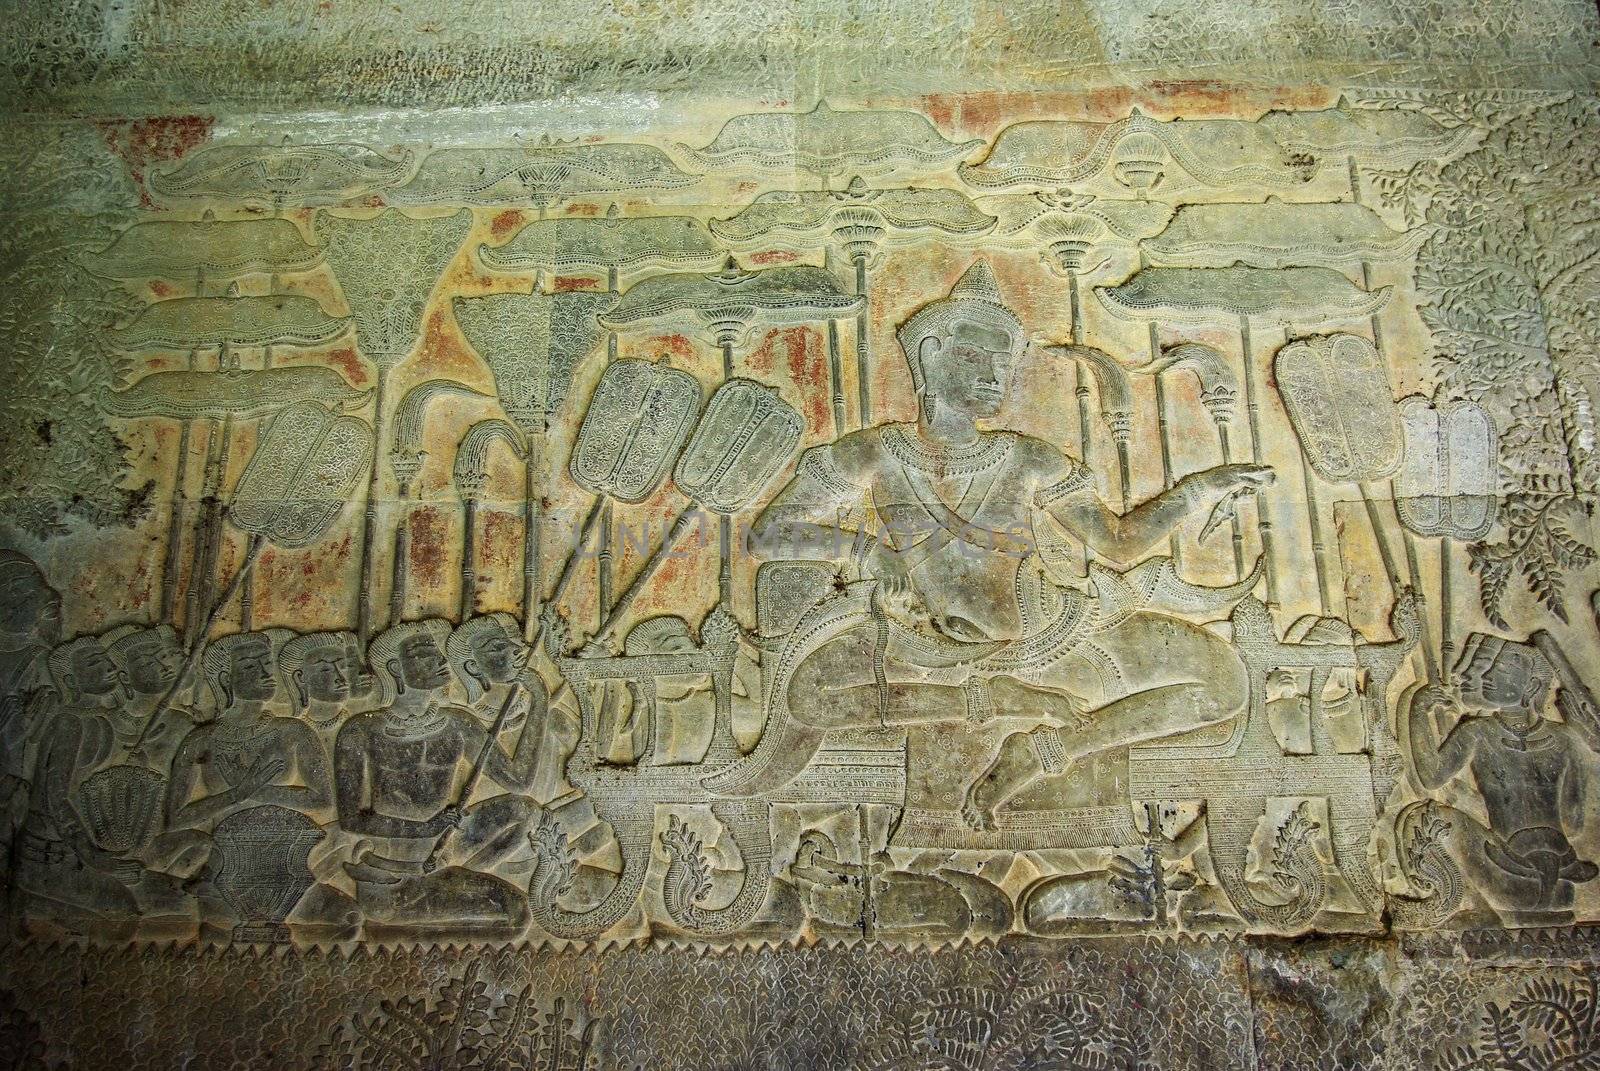 Engraved wall in Angkor Wat temple by shkyo30